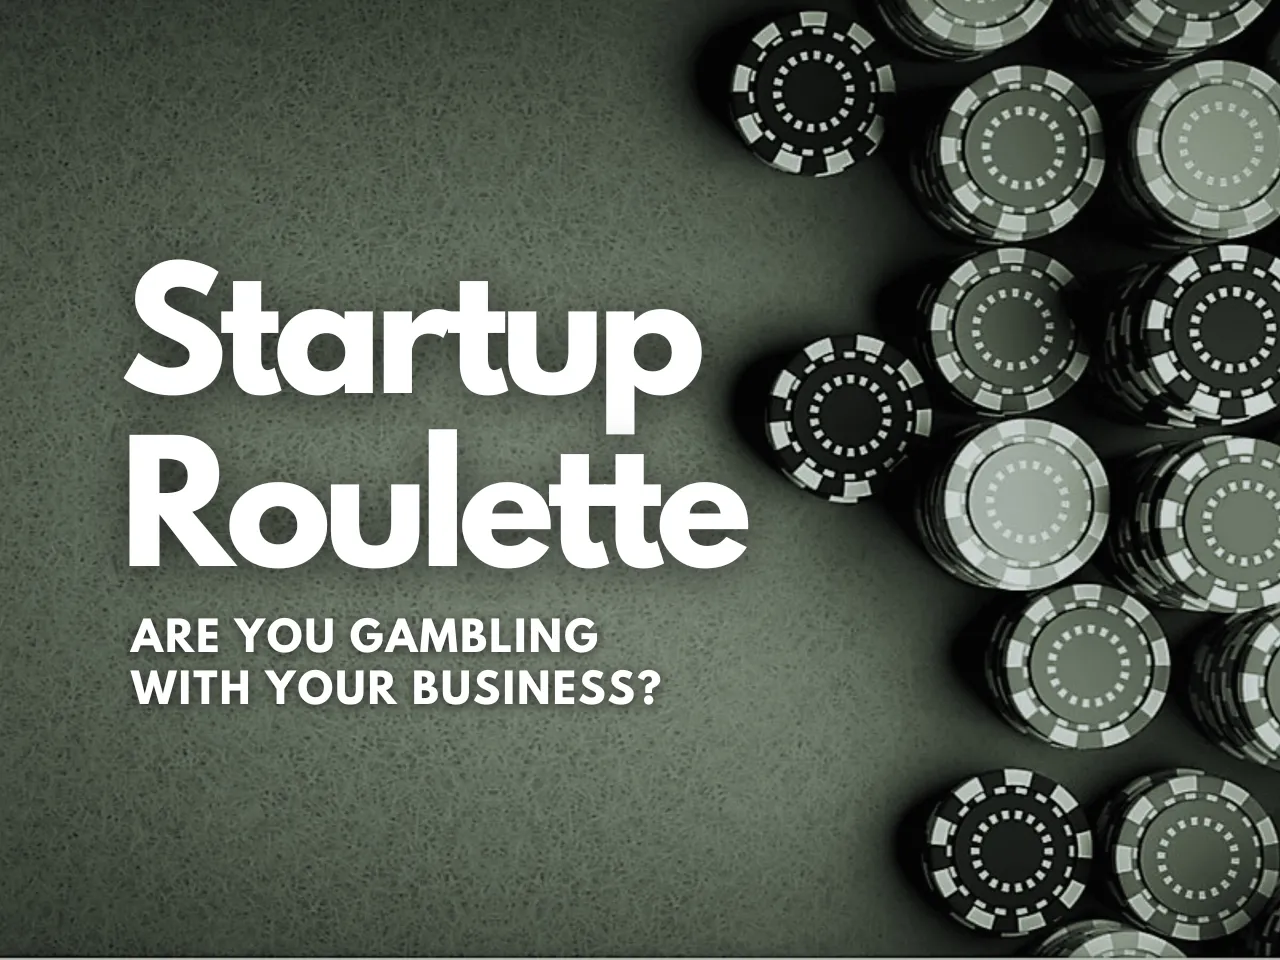 Startup Roulette